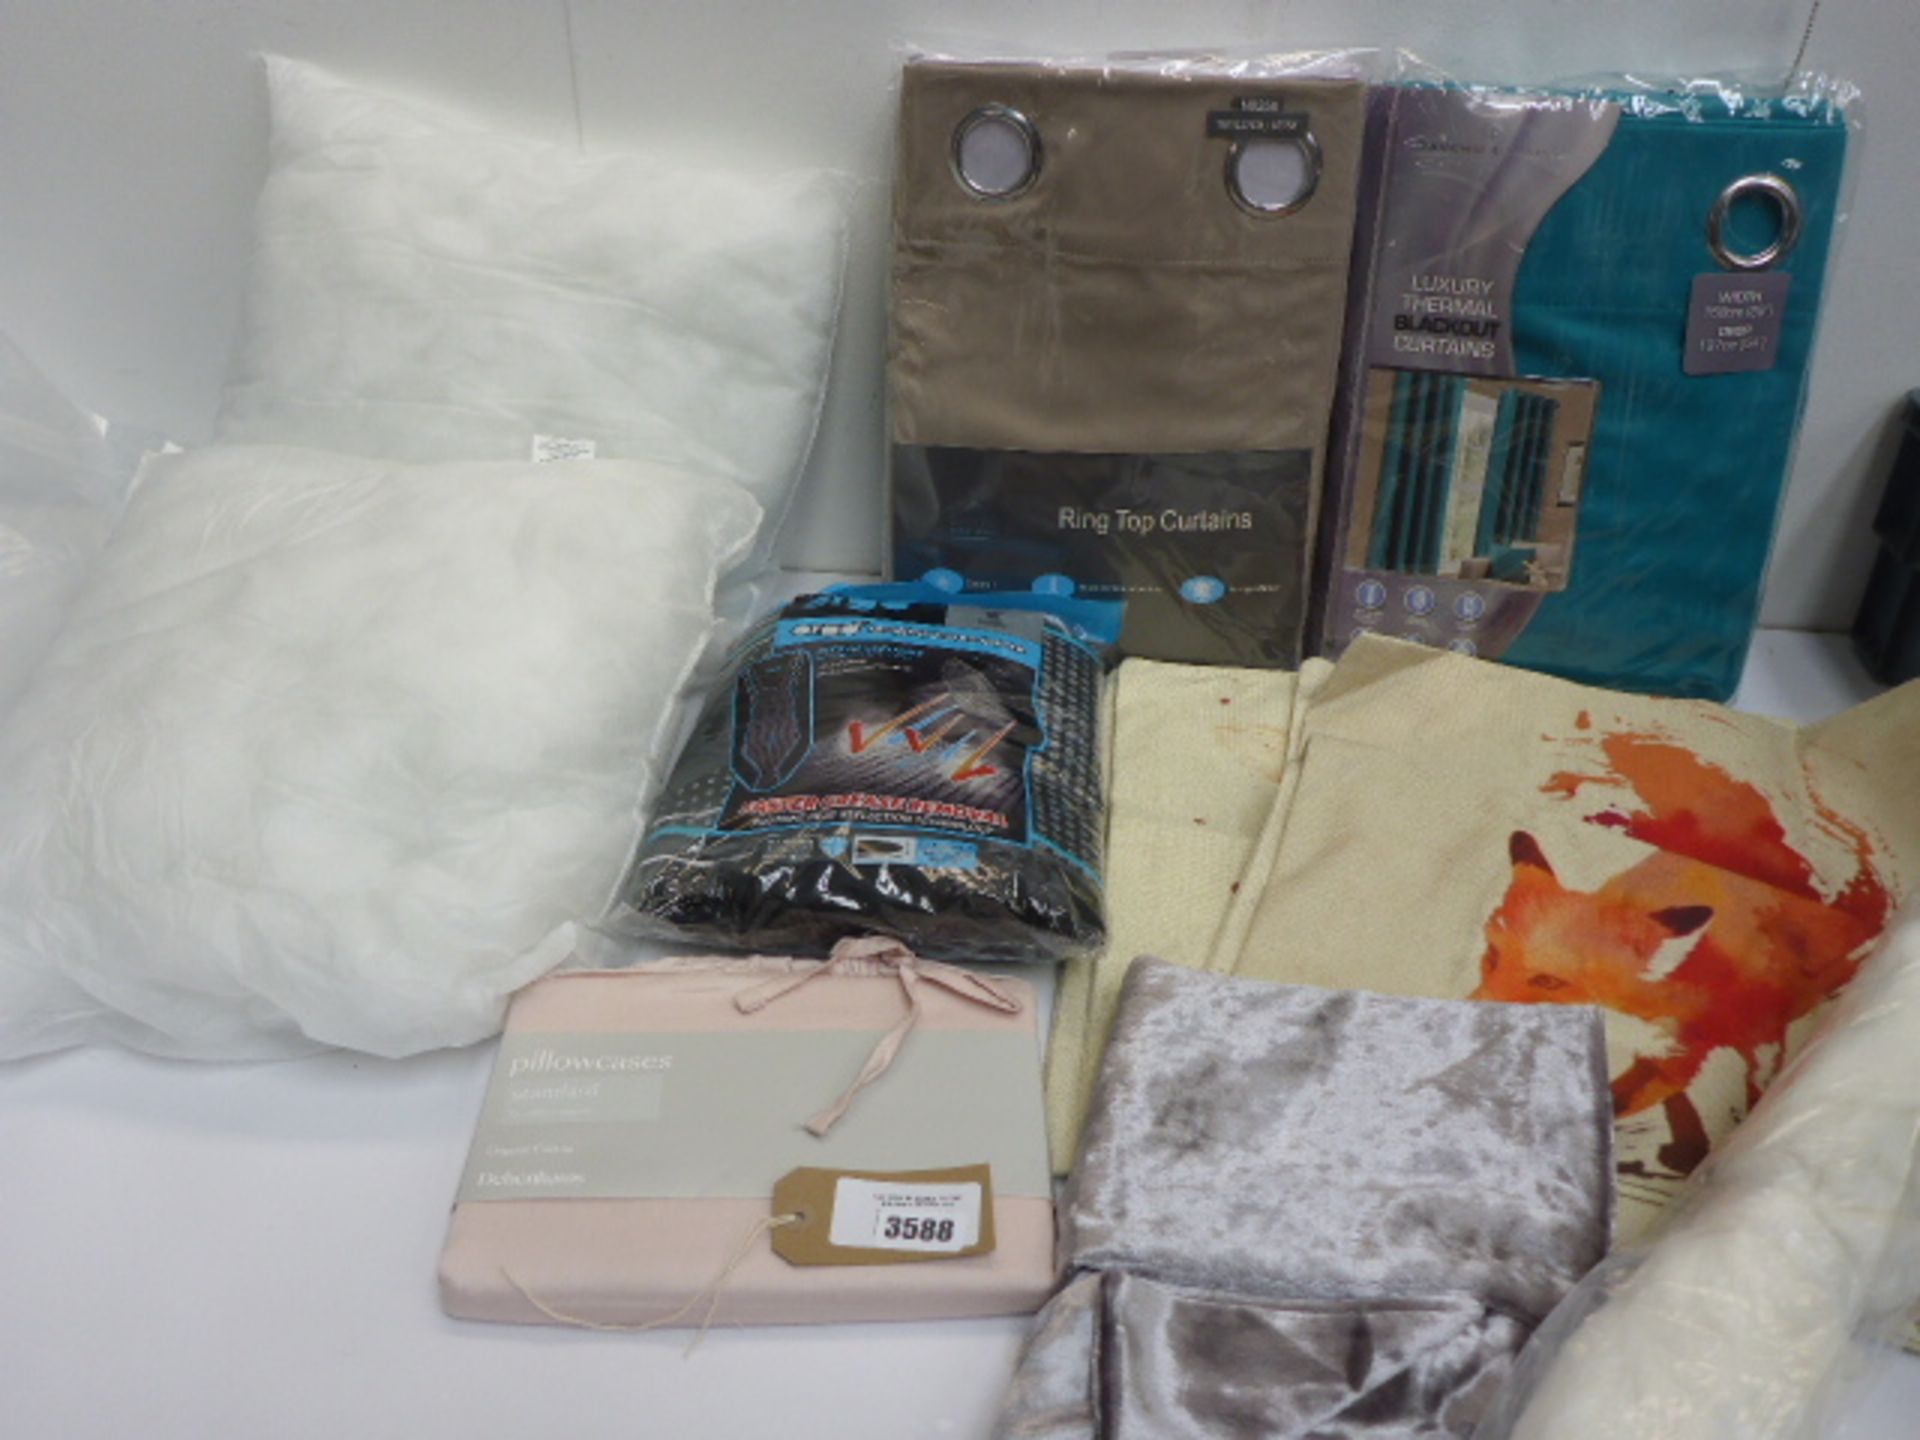 2 sets of ring top curtains, 2 inner cushion pads, cushion covers, pillowcases and ironing board